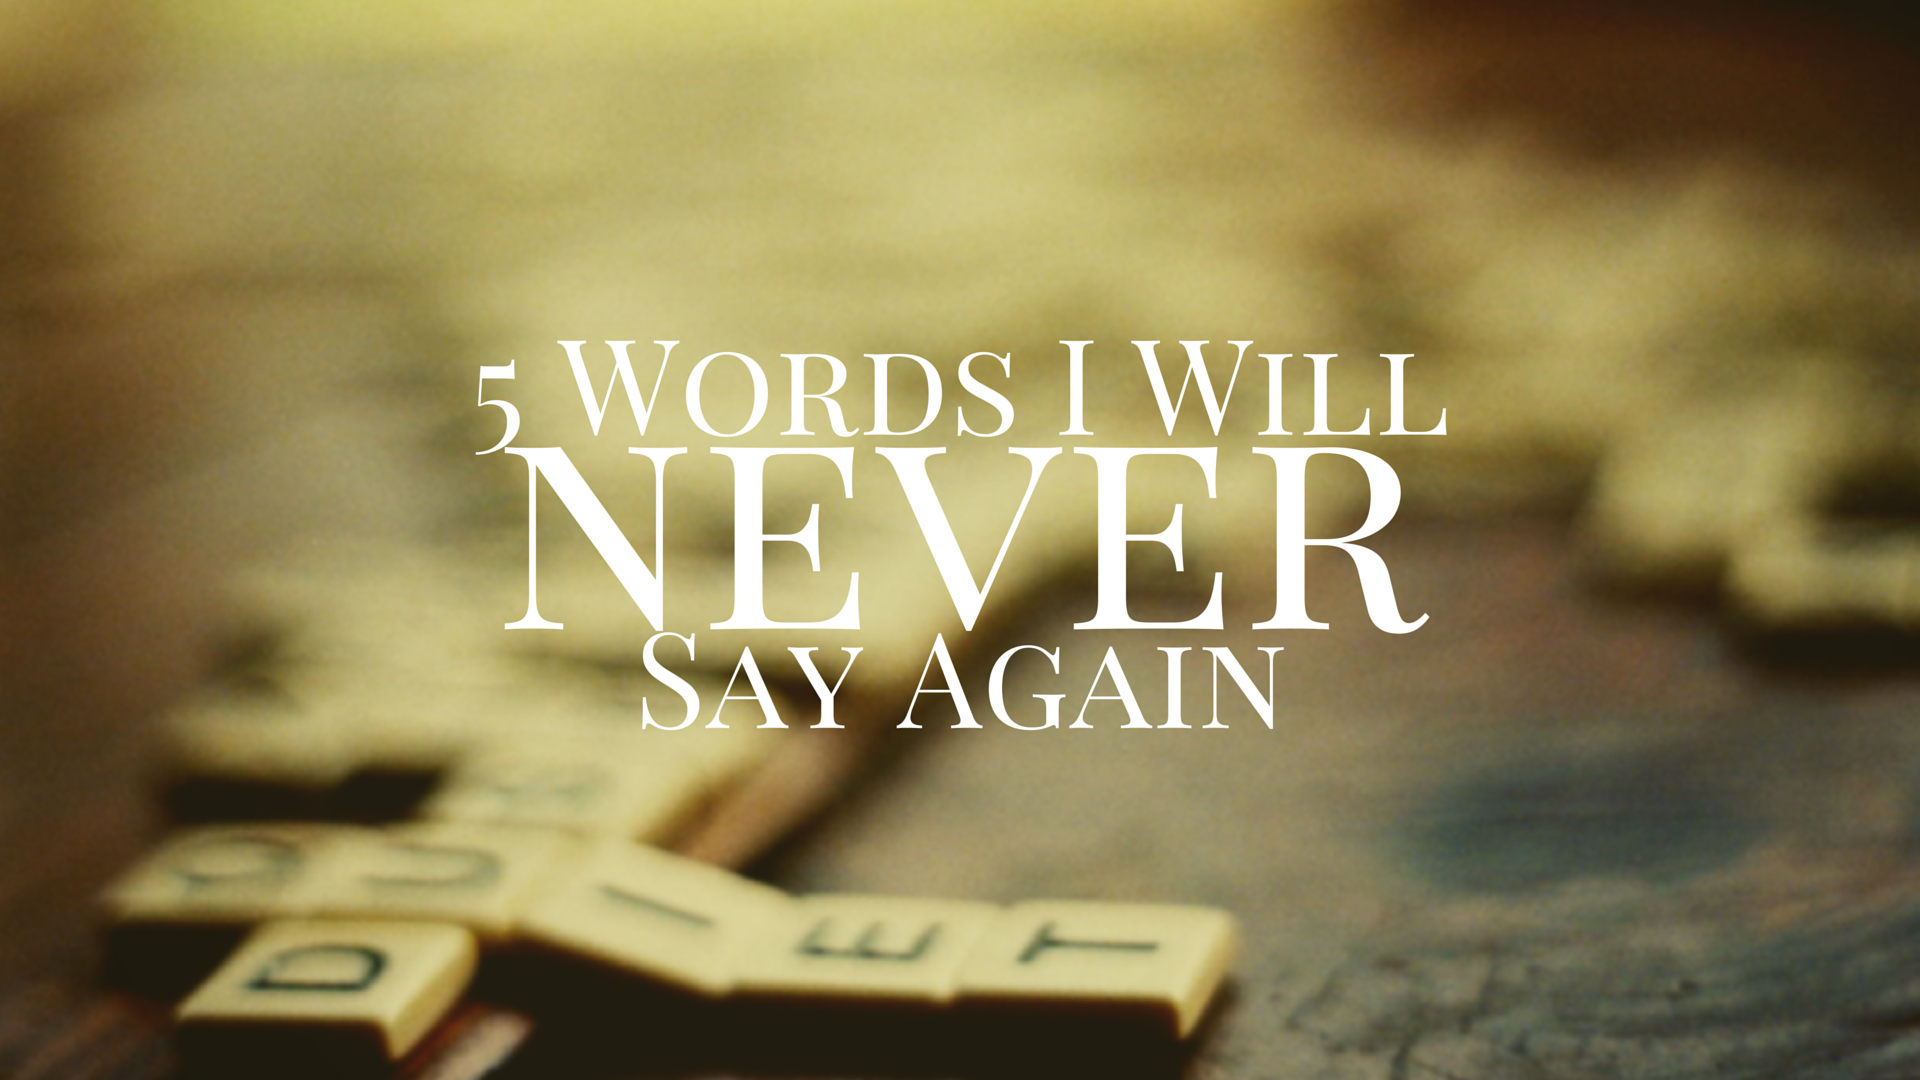 5 Words I Will Never Say Again